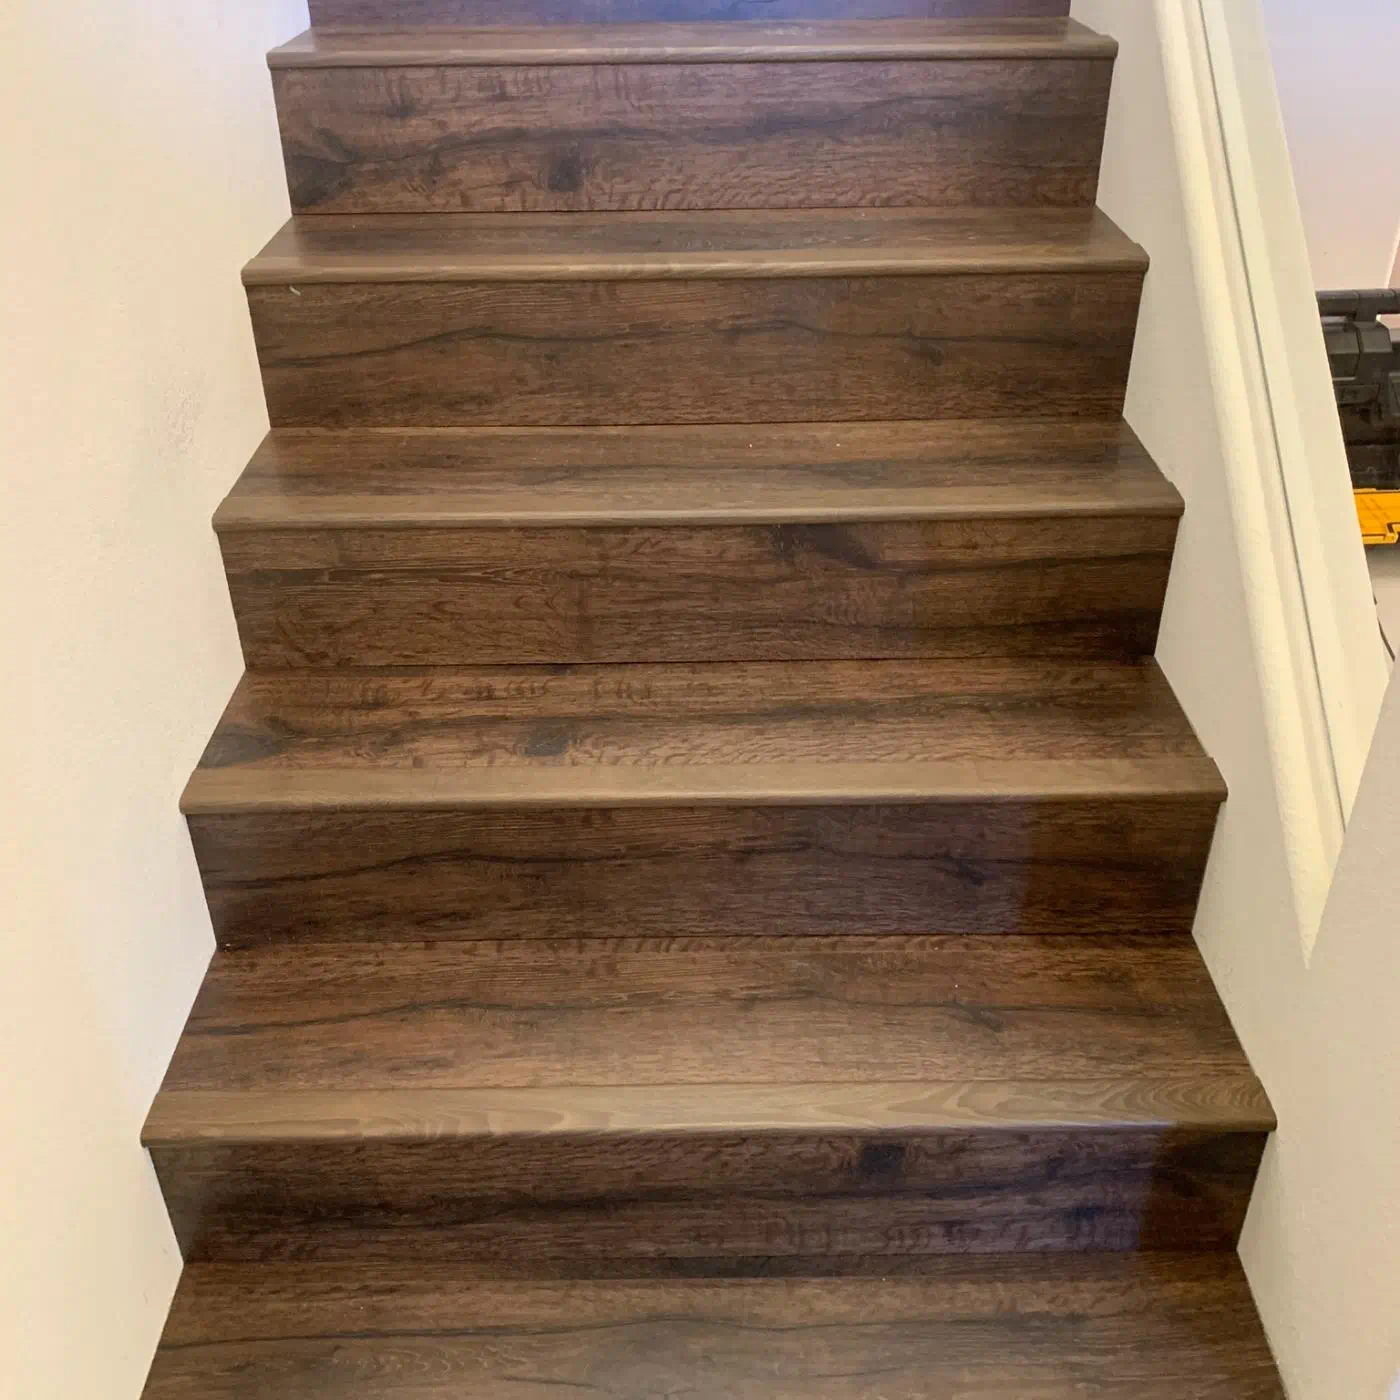 Sometimes sometimes embargo Transplant Flooring and Stairs Remodel | ProSource Wholesale